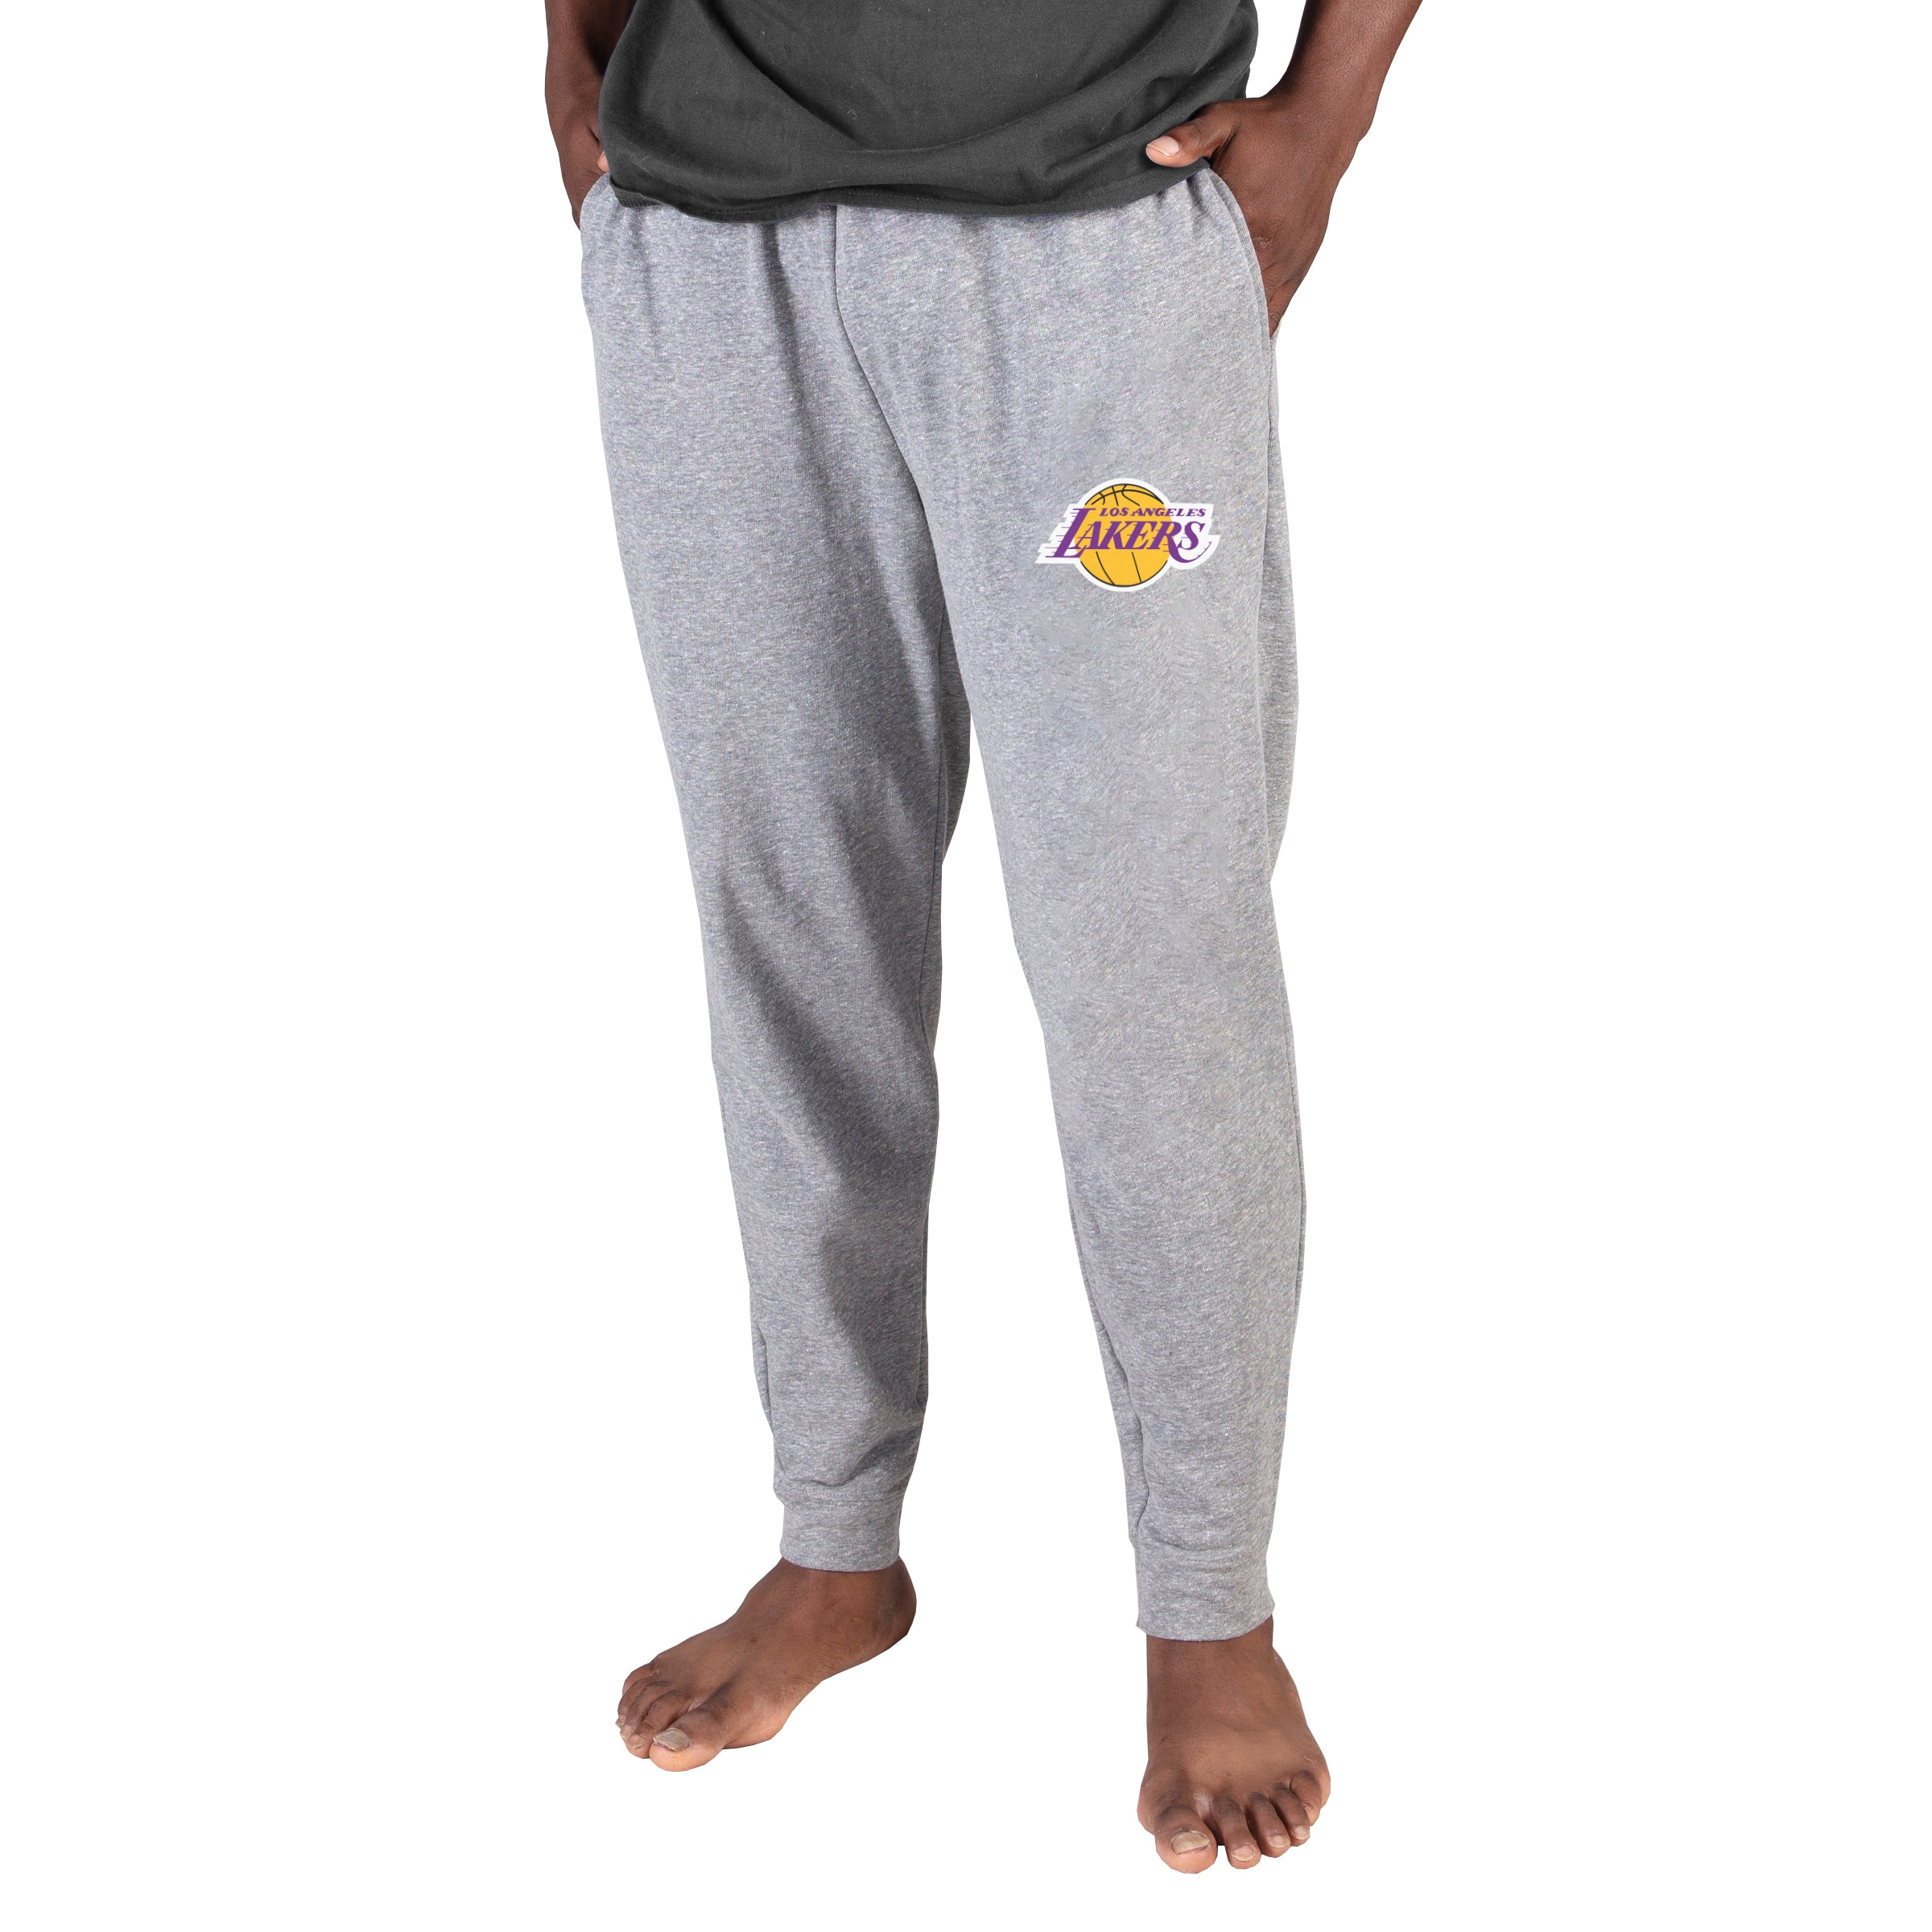 Men's Concepts Sport Gray Los Angeles Lakers Mainstream Cuffed Terry Pants - image 1 of 1